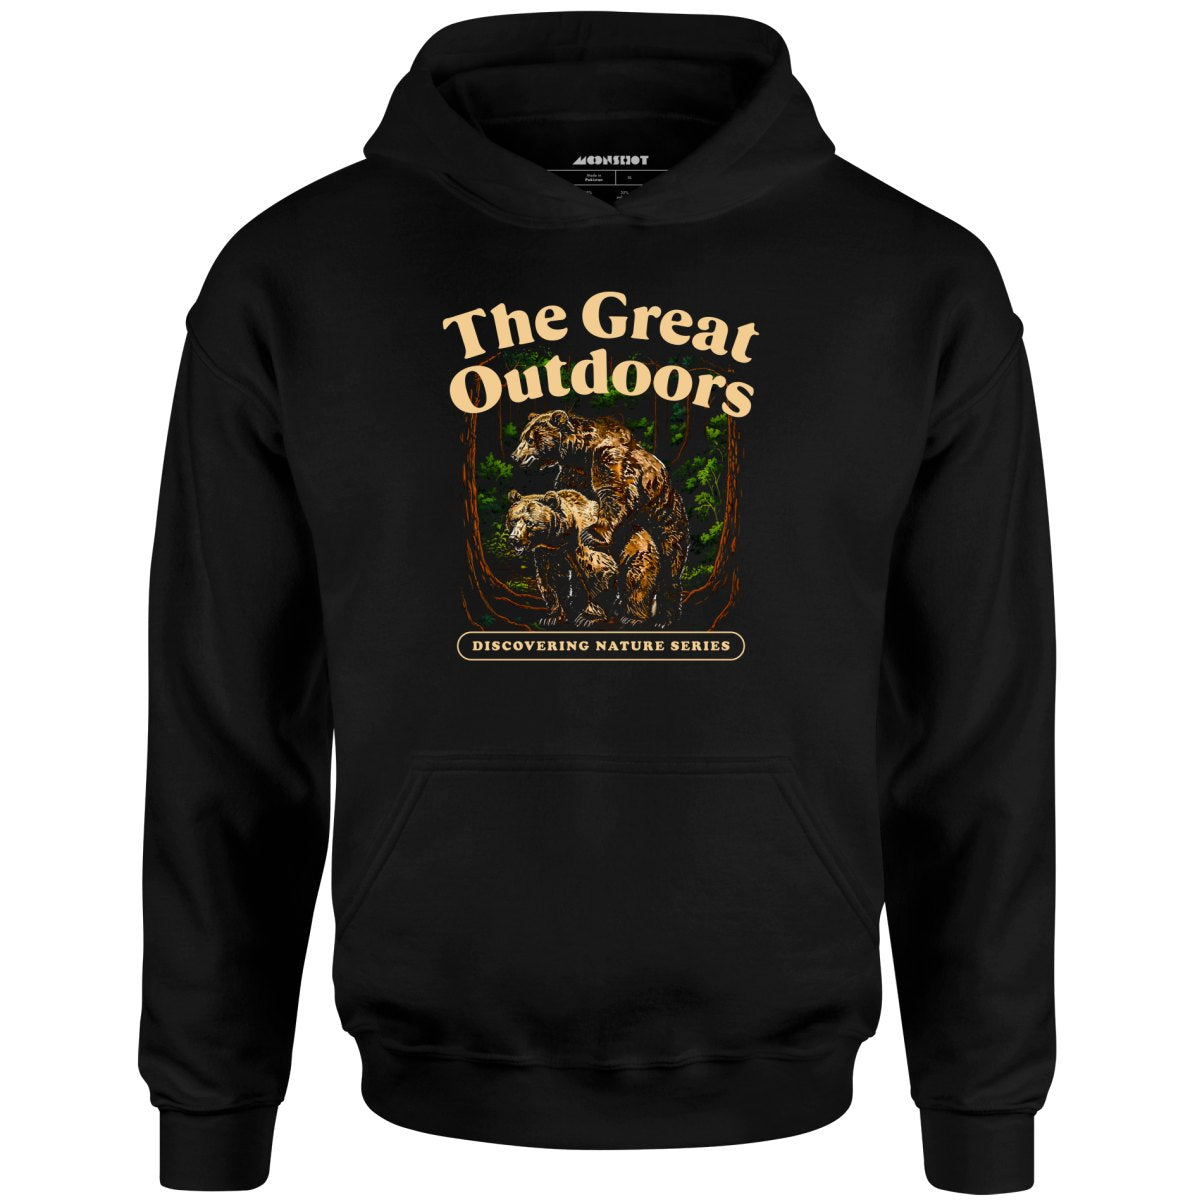 The Great Outdoors - Unisex Hoodie